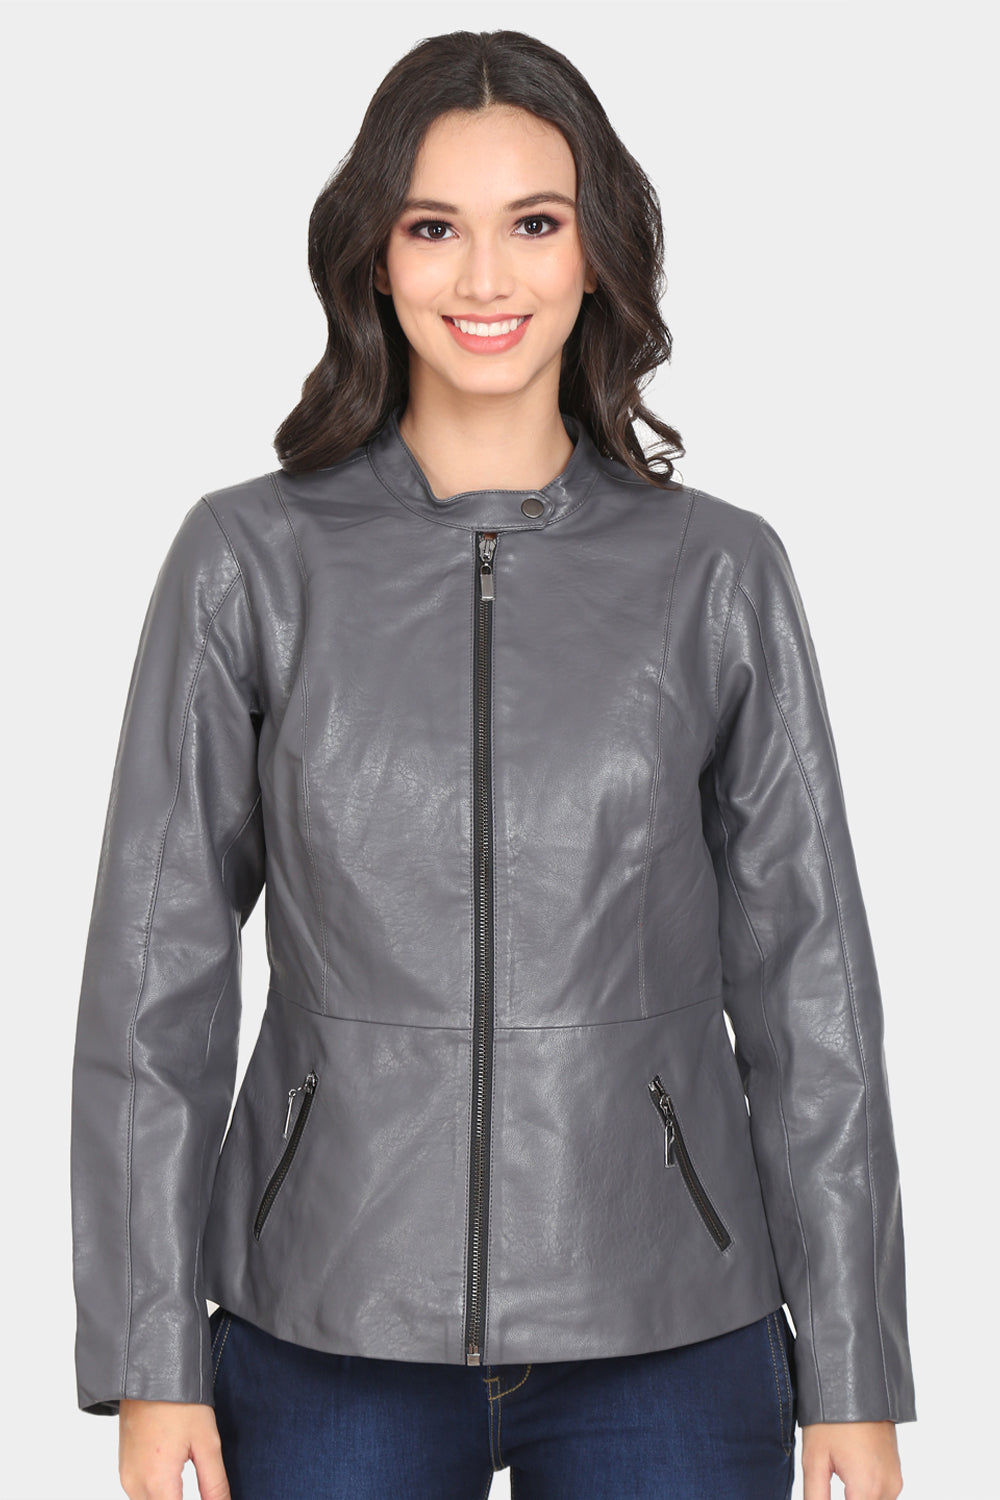 Justanned Lava Grey Leather Jacket